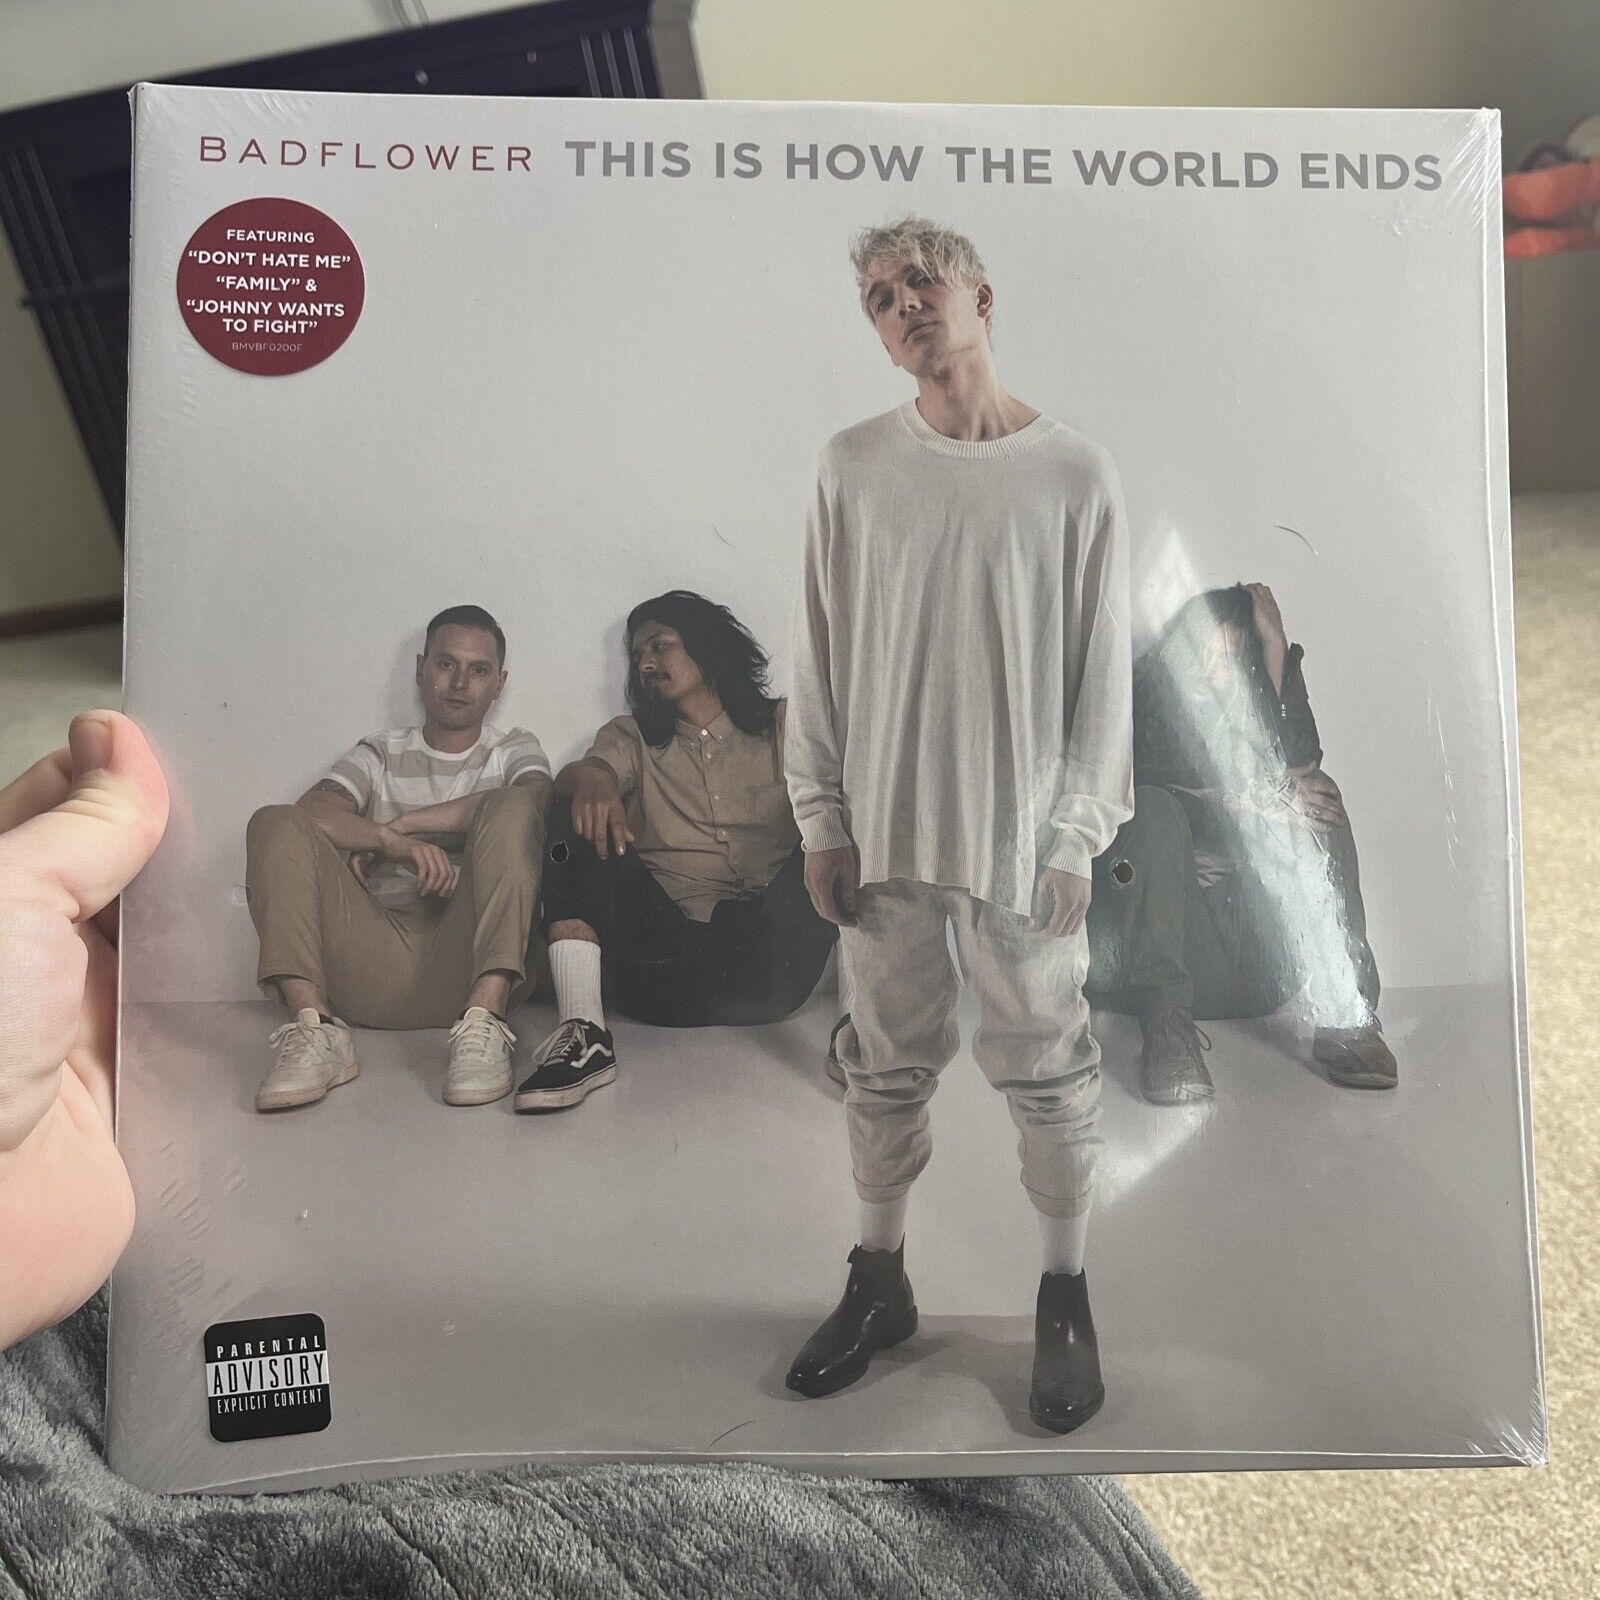 Badflower-This is How The World Ends Vinyl Record New Don’t Hate Me Family